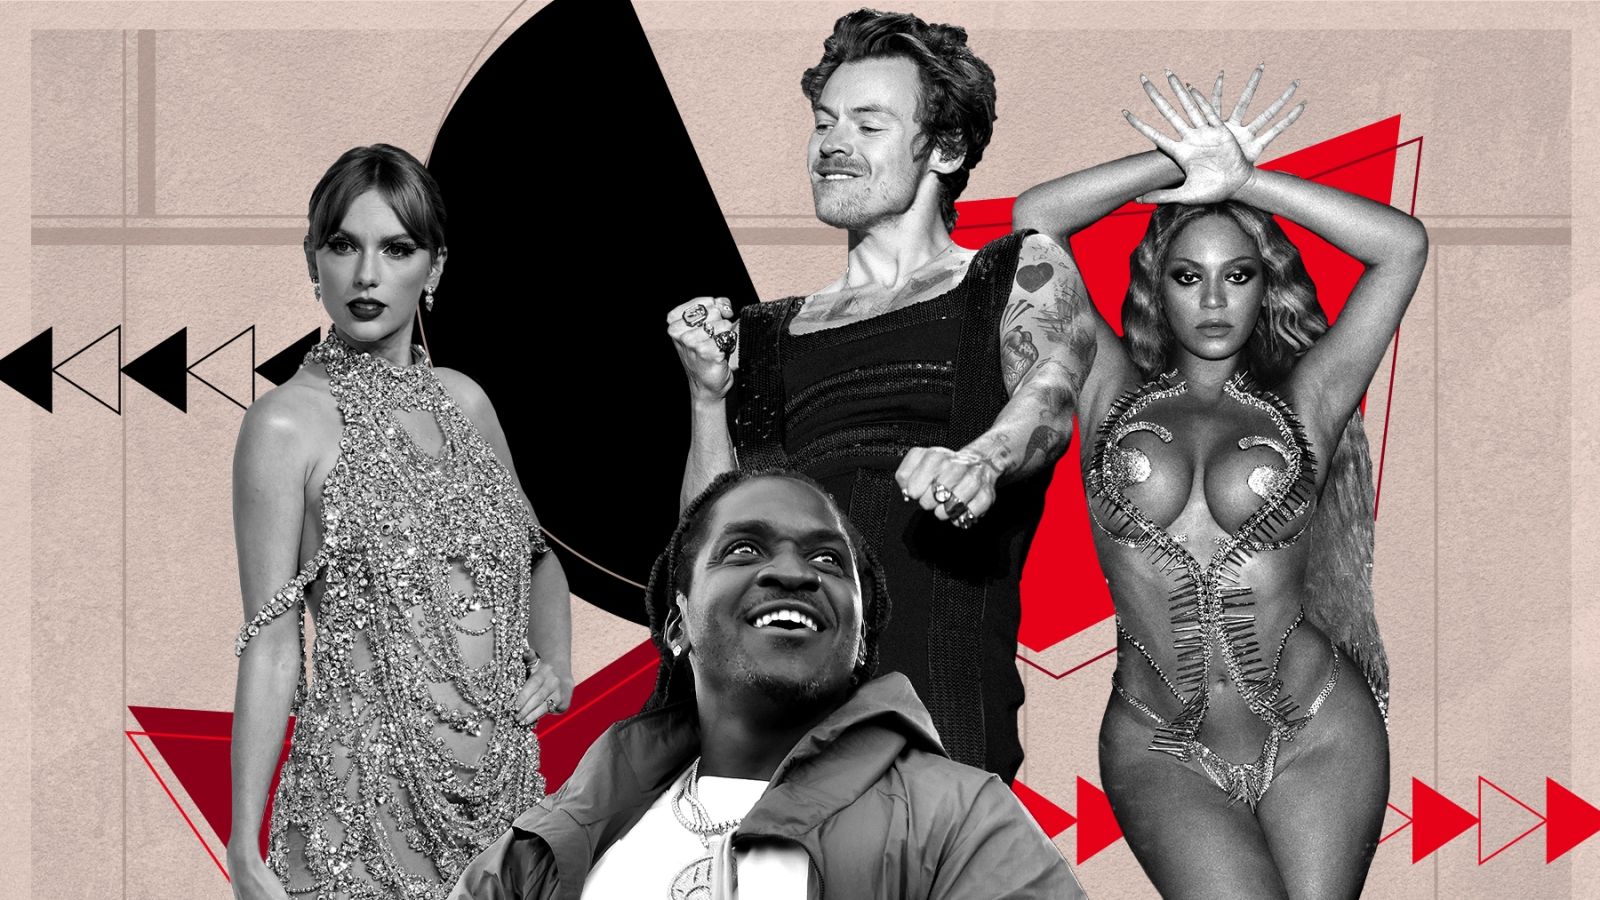 A collage of people in various poses - Beyonce